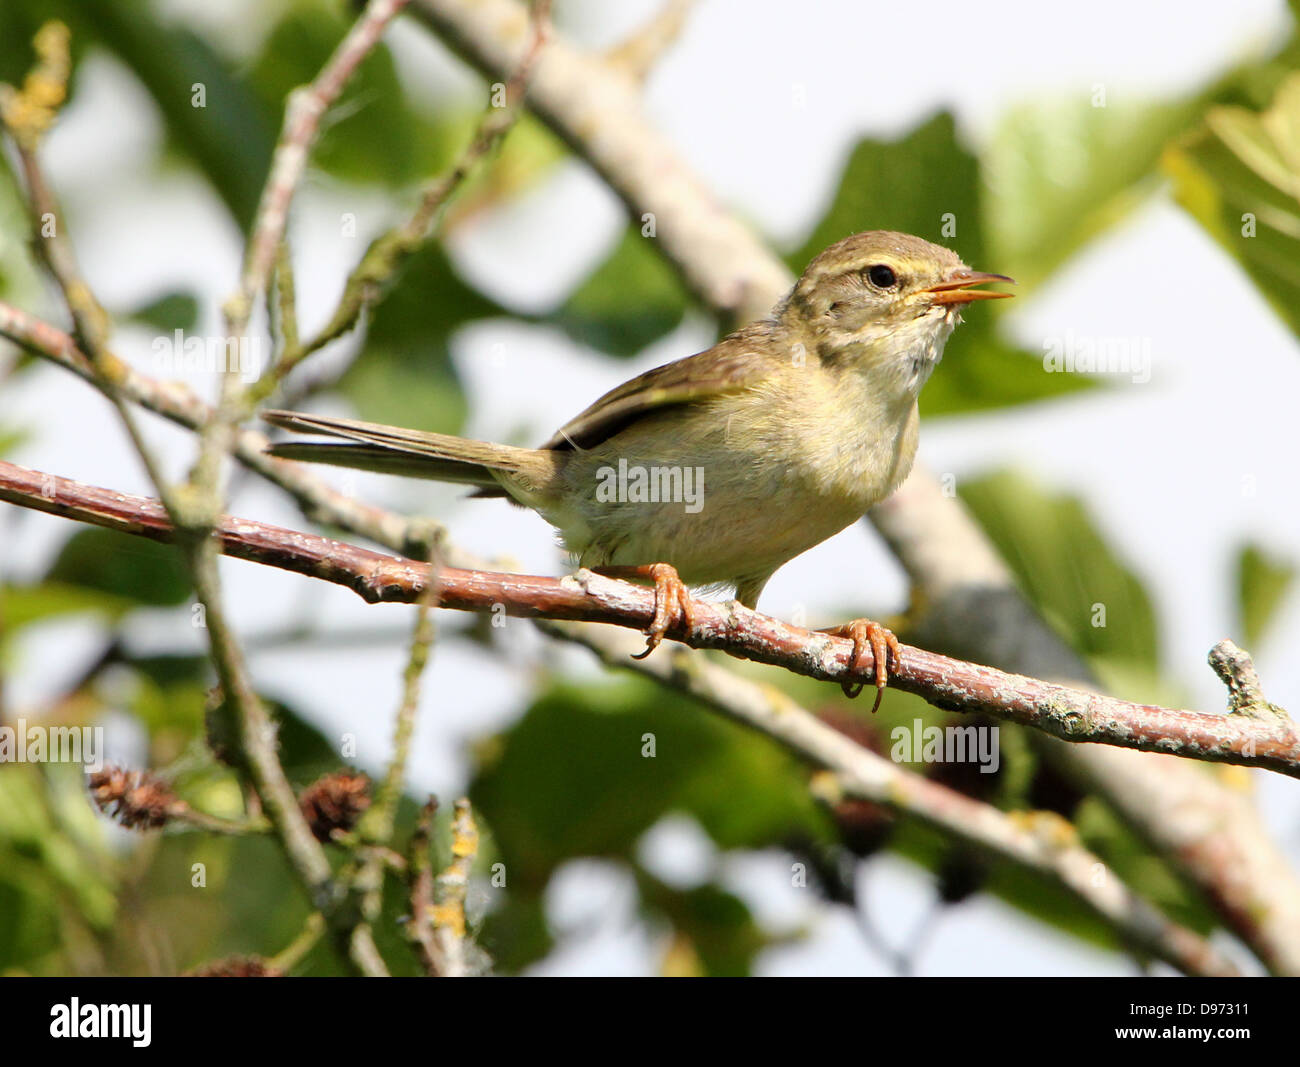 Detailed close-up of a confident Willow Warbler (Phylloscopus trochilus) posing on a branch in spring Stock Photo